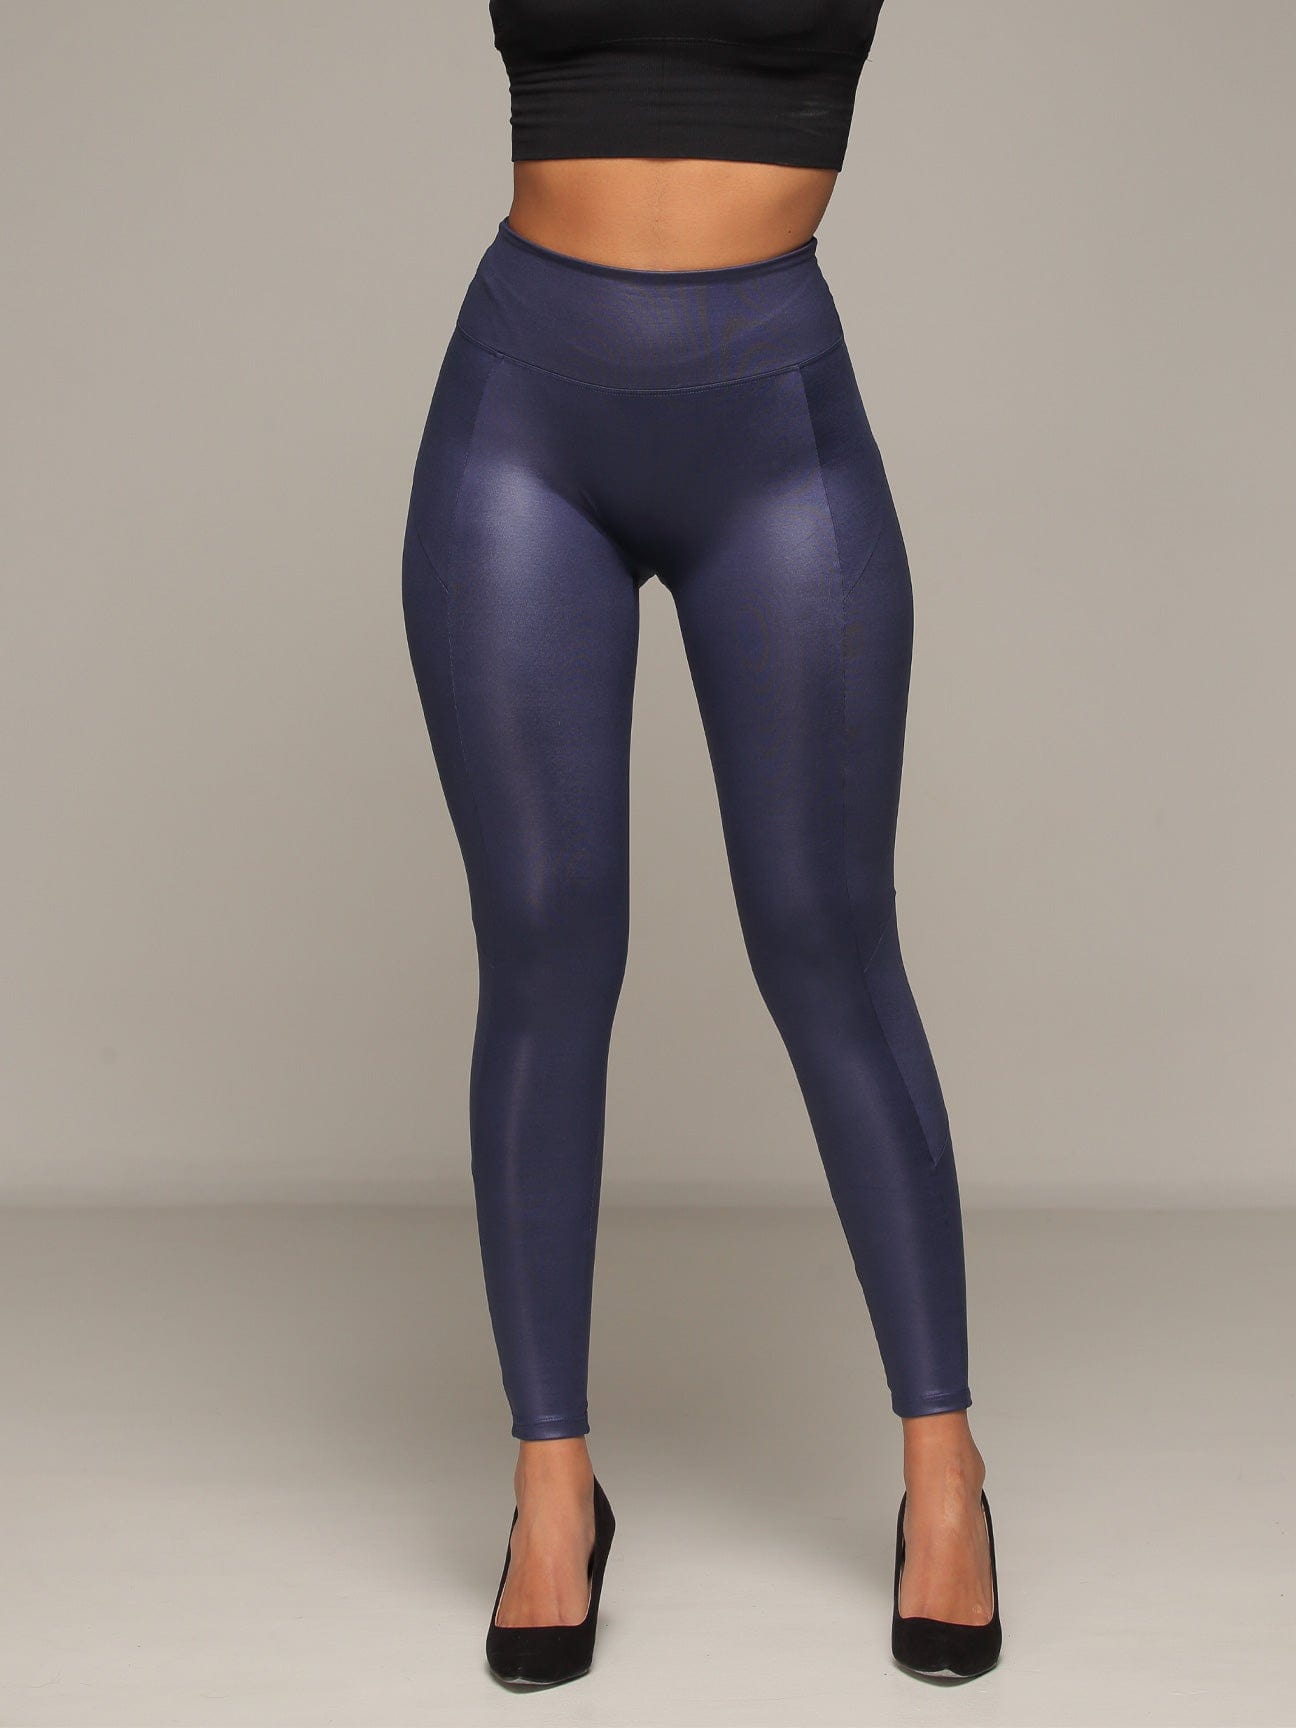 Florence Leggings with Butt Lift and Tummy Control lower body view.